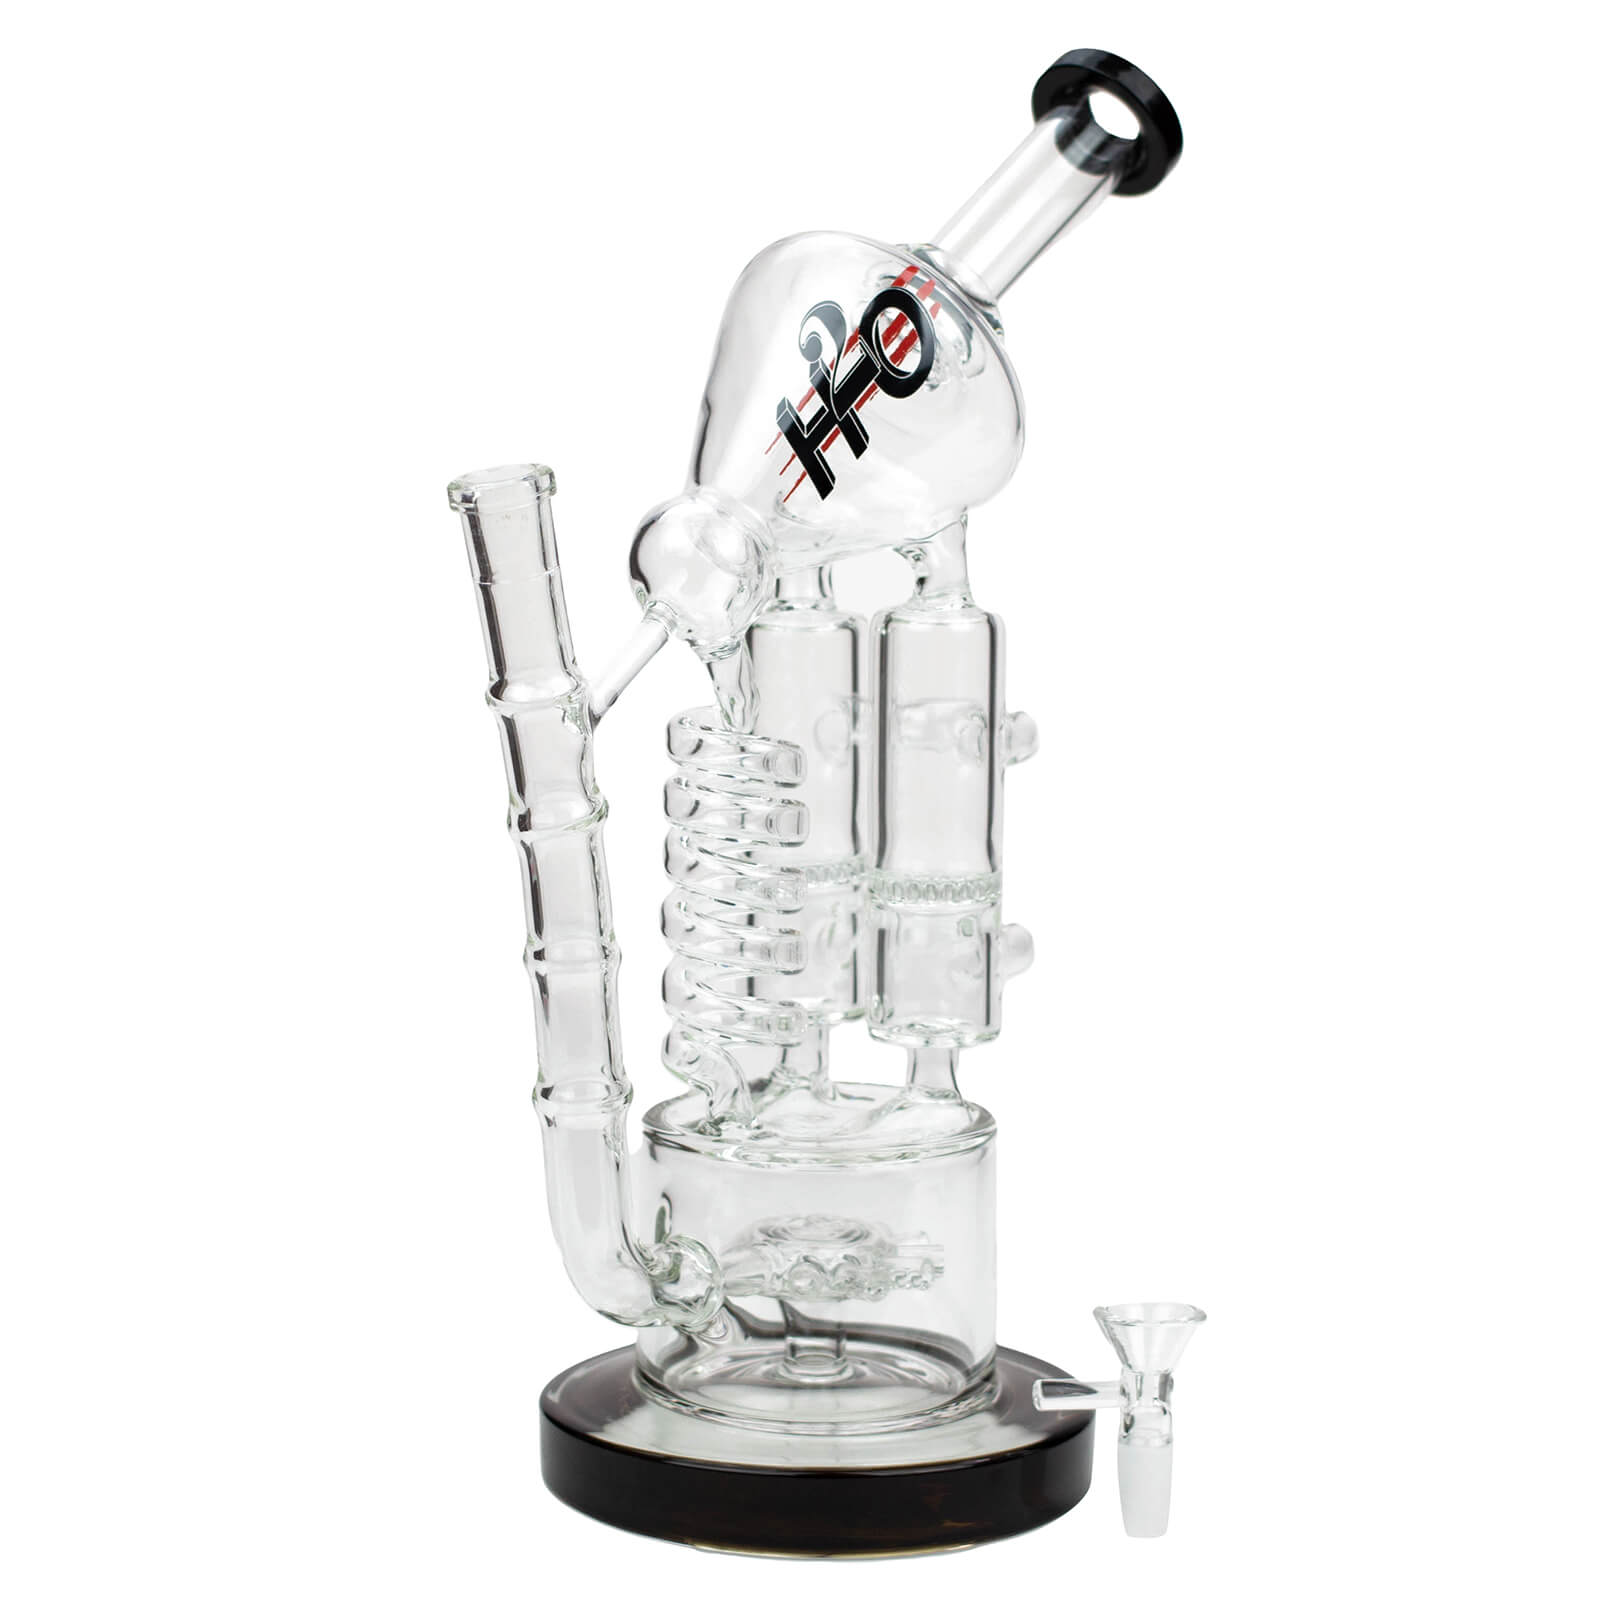 12" H2O Coil Glass Water Recycle Bong